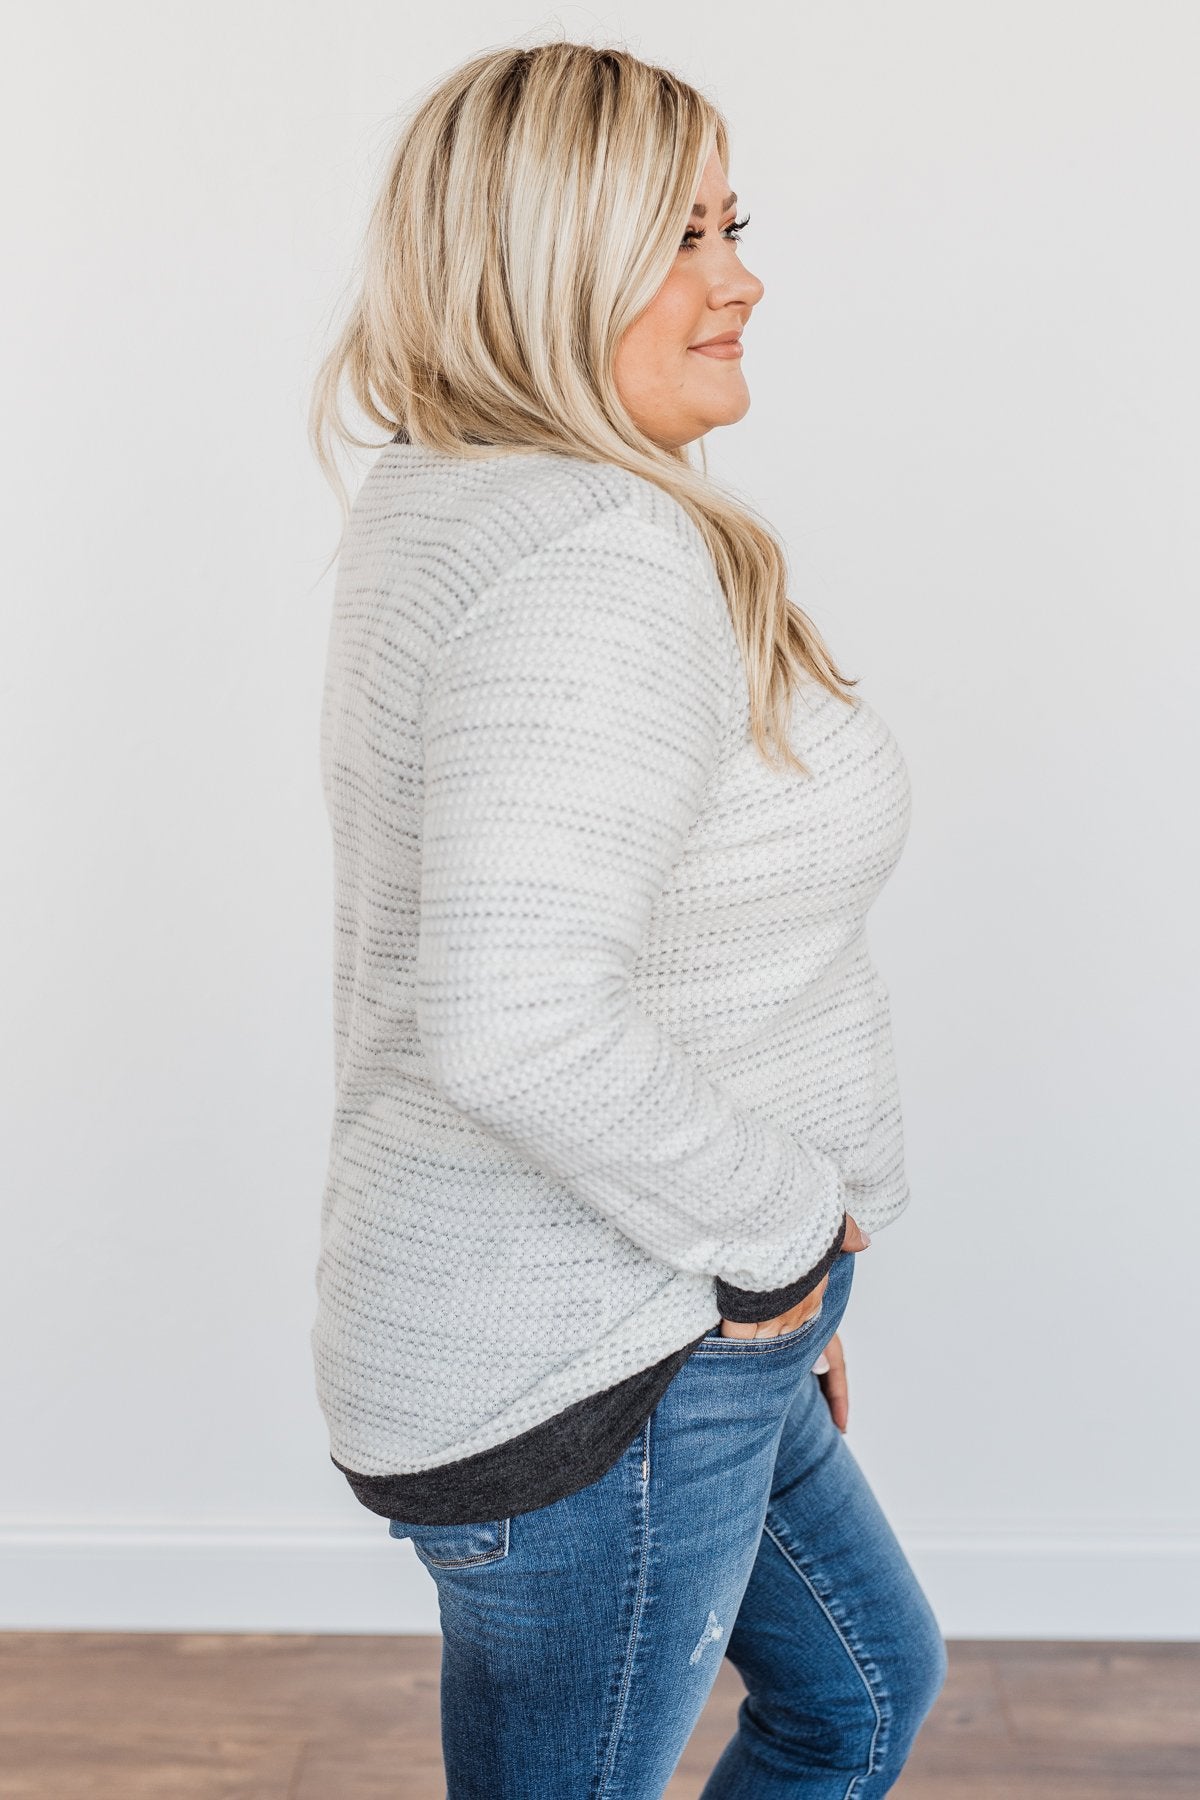 Autumn Days Are Here To Stay Waffle Knit Top- Ivory